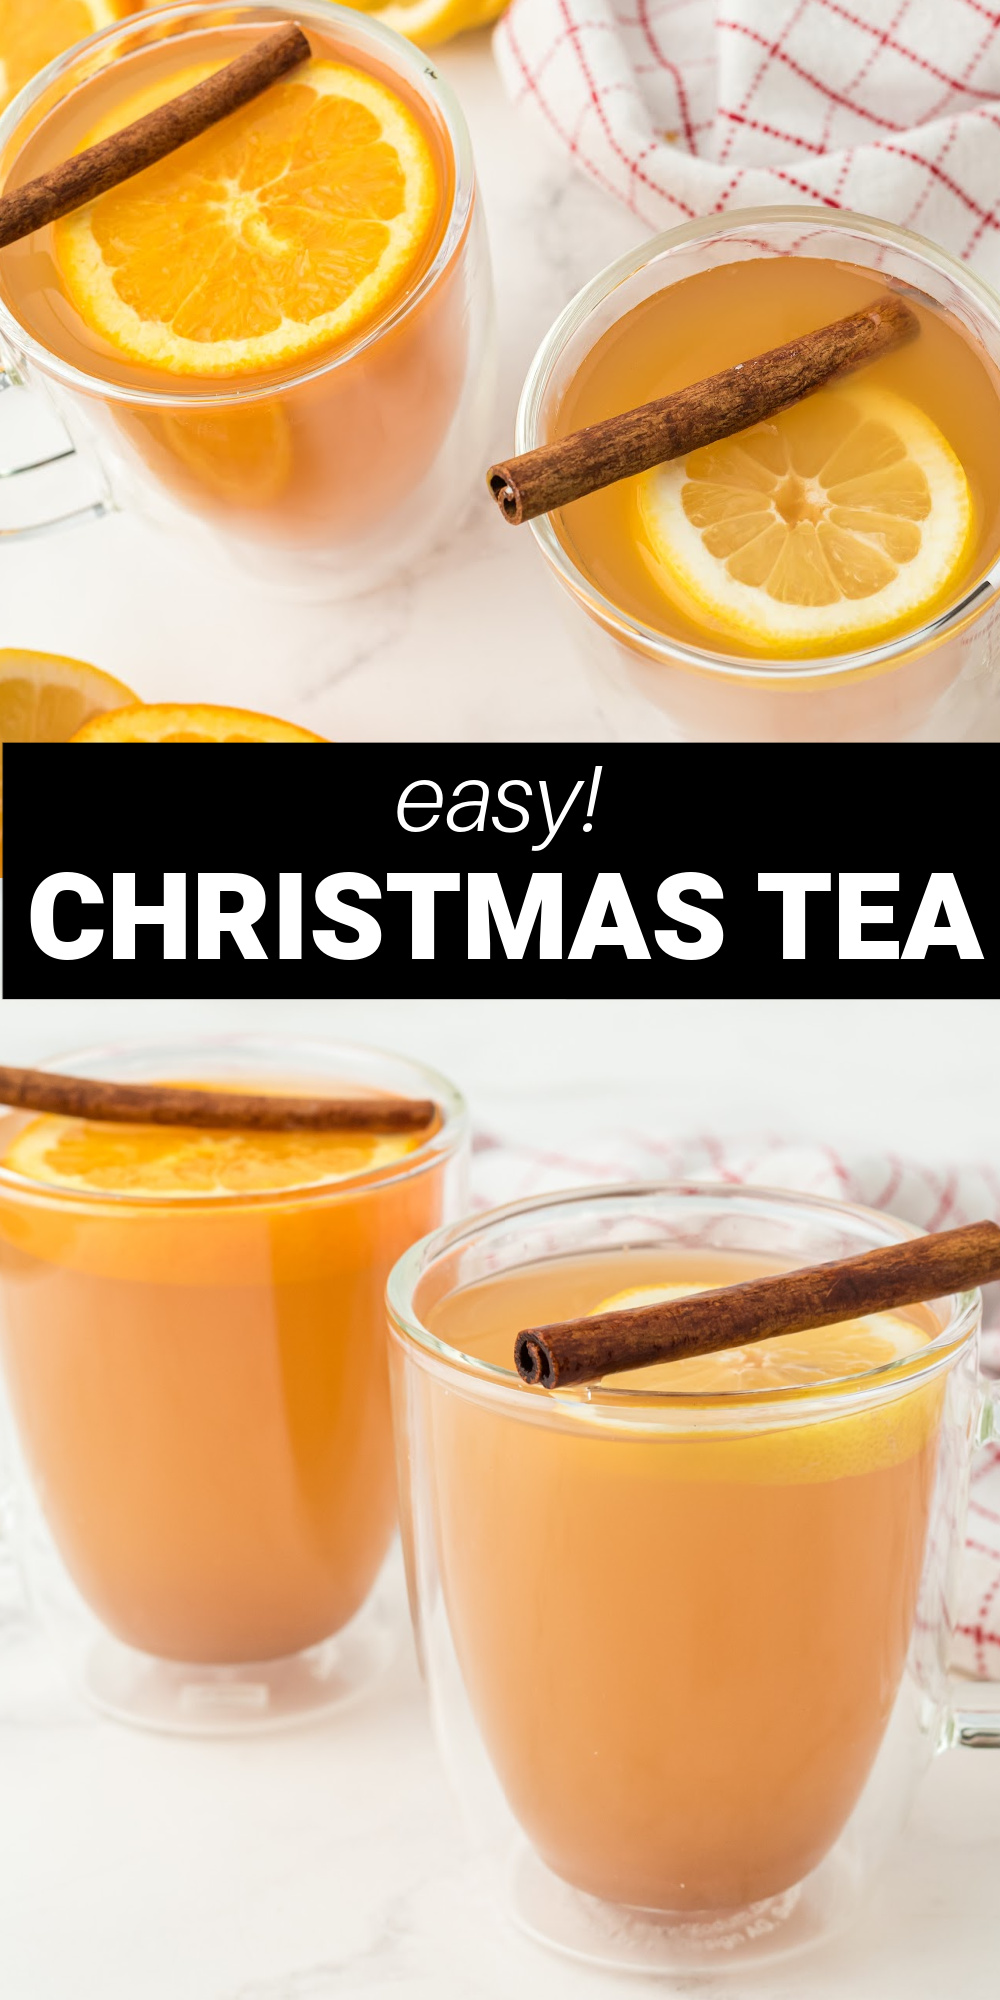 istmas spirit more than this hot, spiced and delicious Christmas Tea recipe. The tangy flavor from citrus fruits and the warmth from the spices makes the most soothing and refreshing beverage to serve during the holiday season.